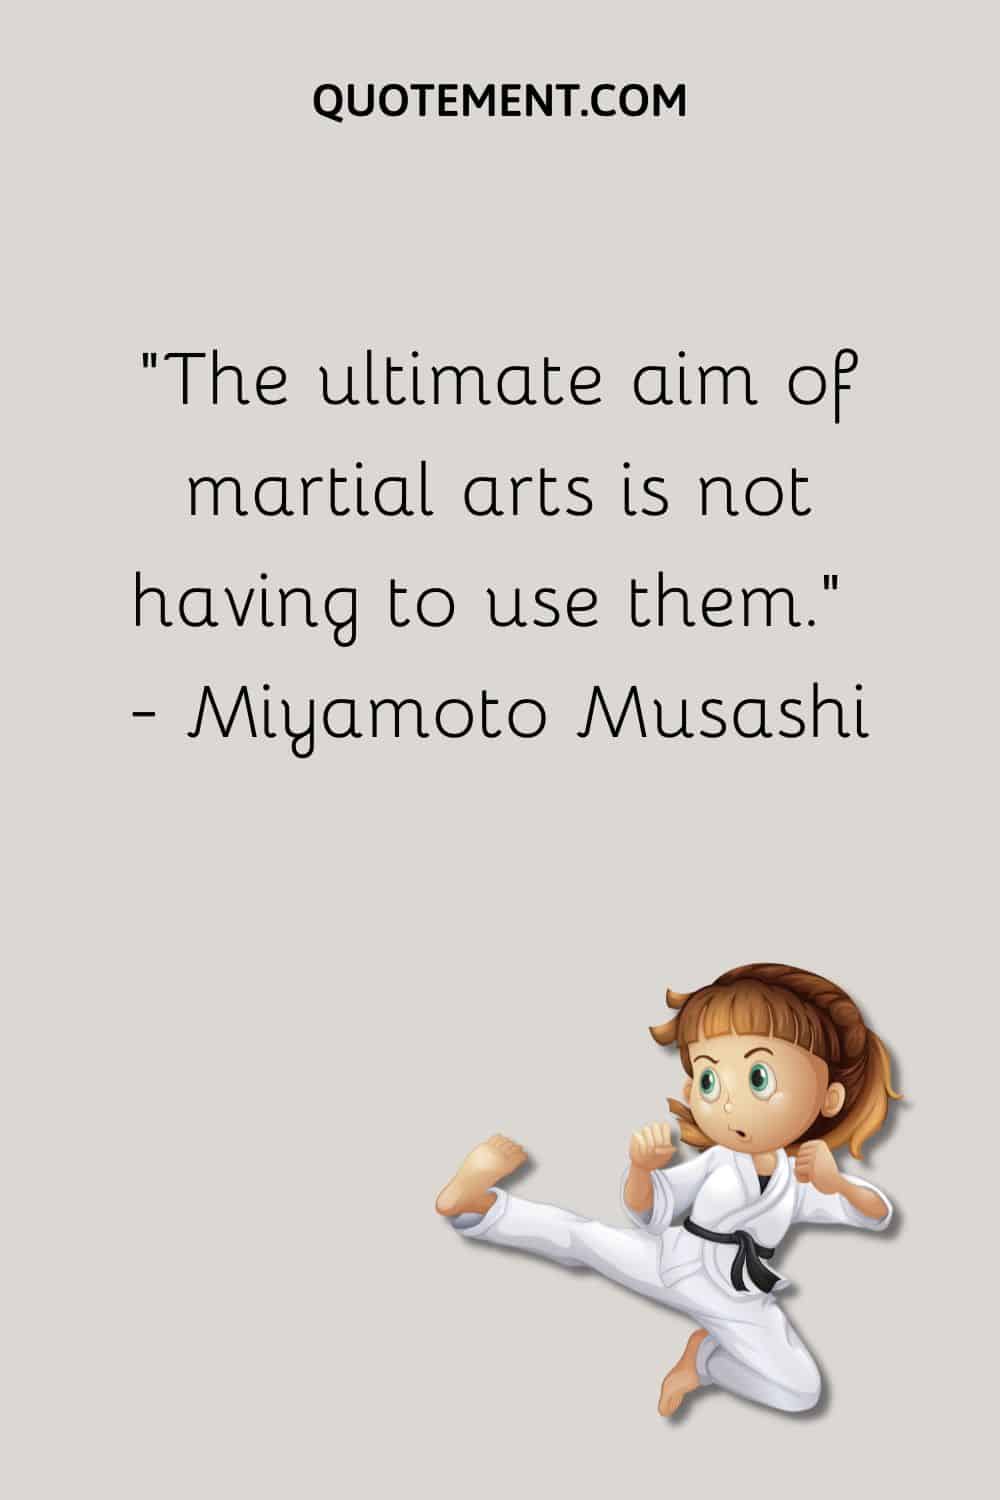 The ultimate aim of martial arts is not having to use them